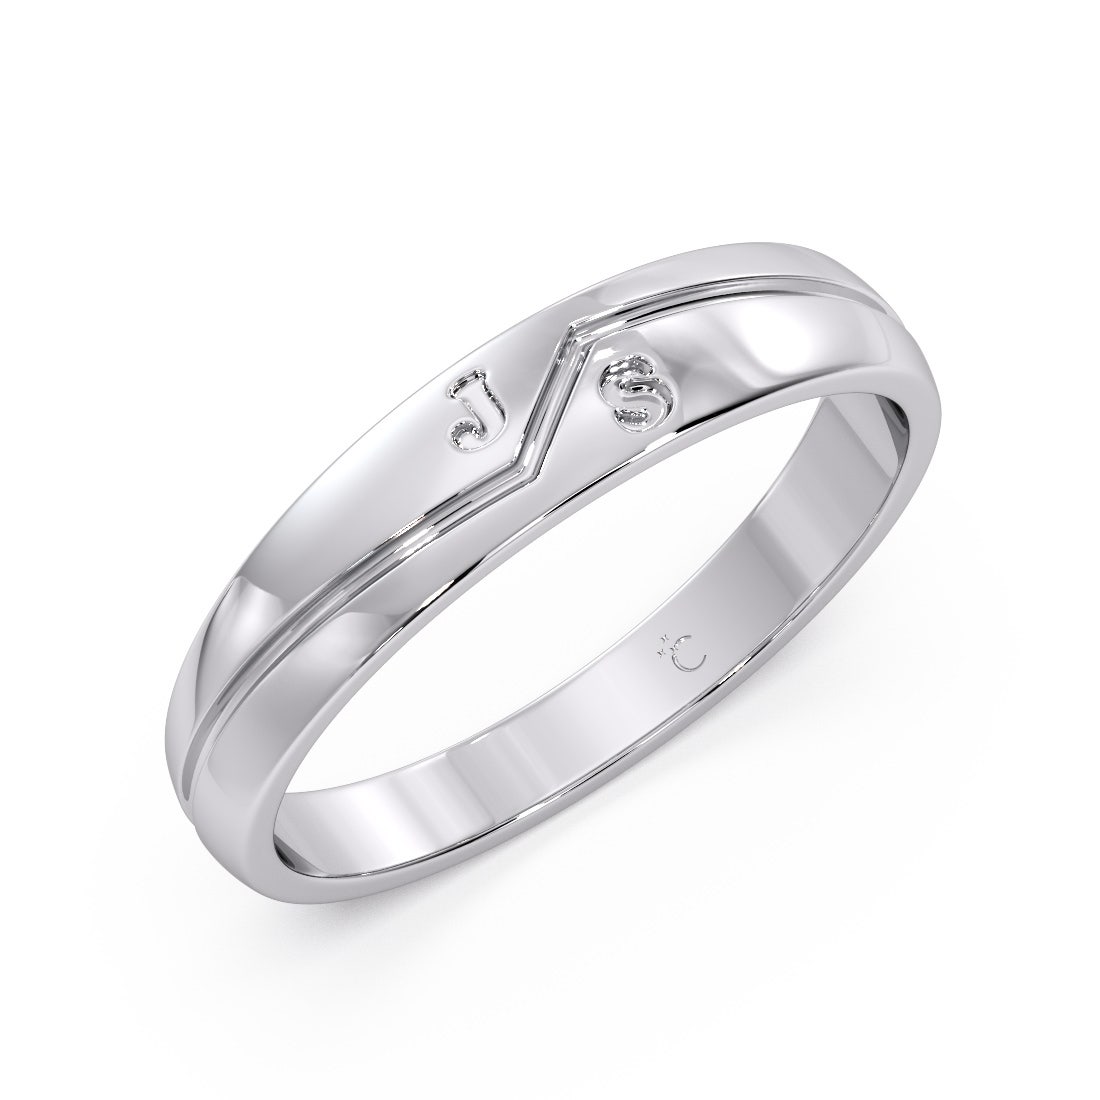 Platinum Rings for men | Platinum band collections | kalyan jewellers